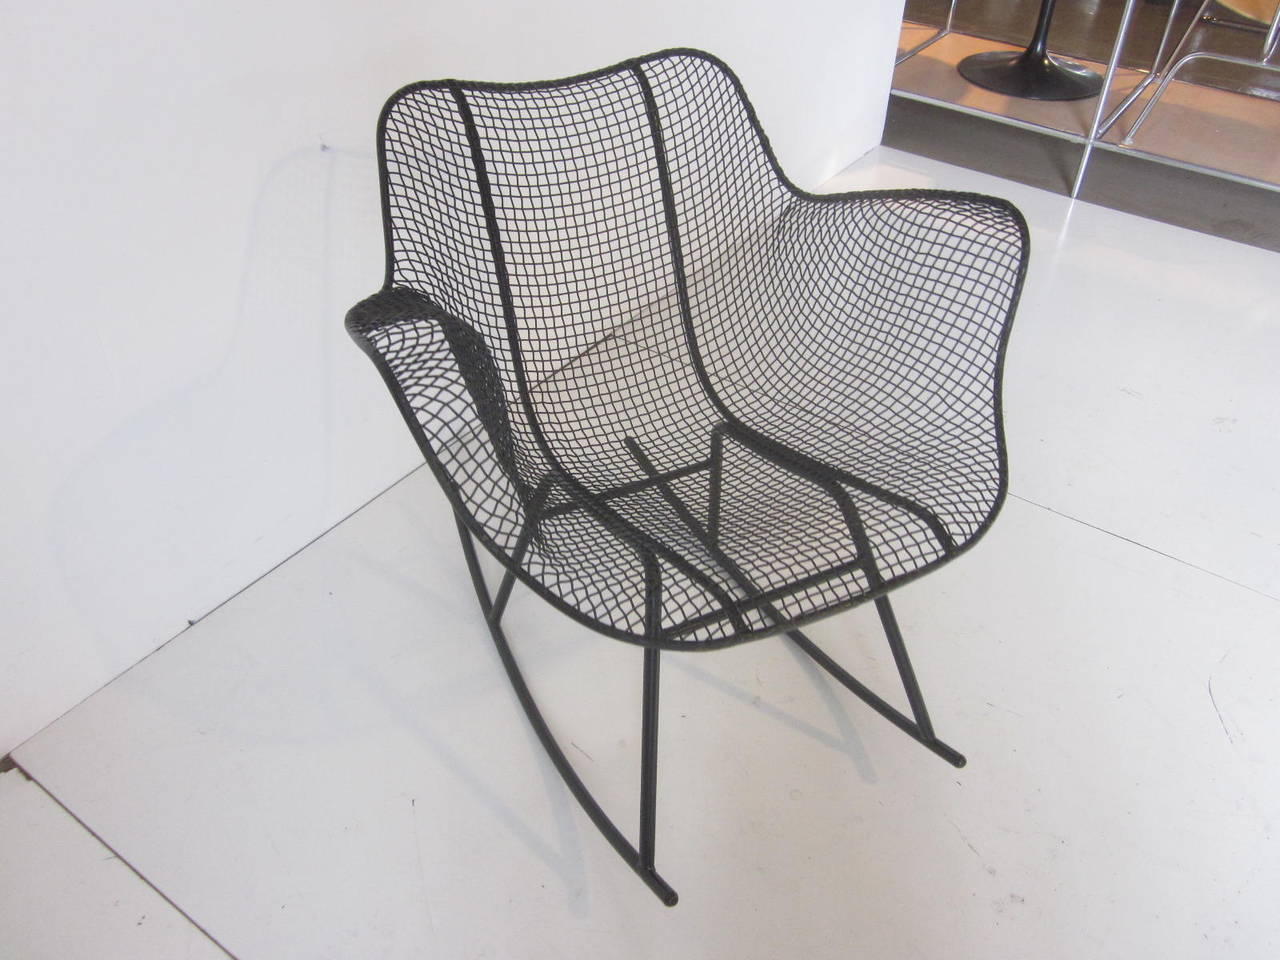 A molded steel mesh rocking chair in black wire and iron in the style of Charles Eames.